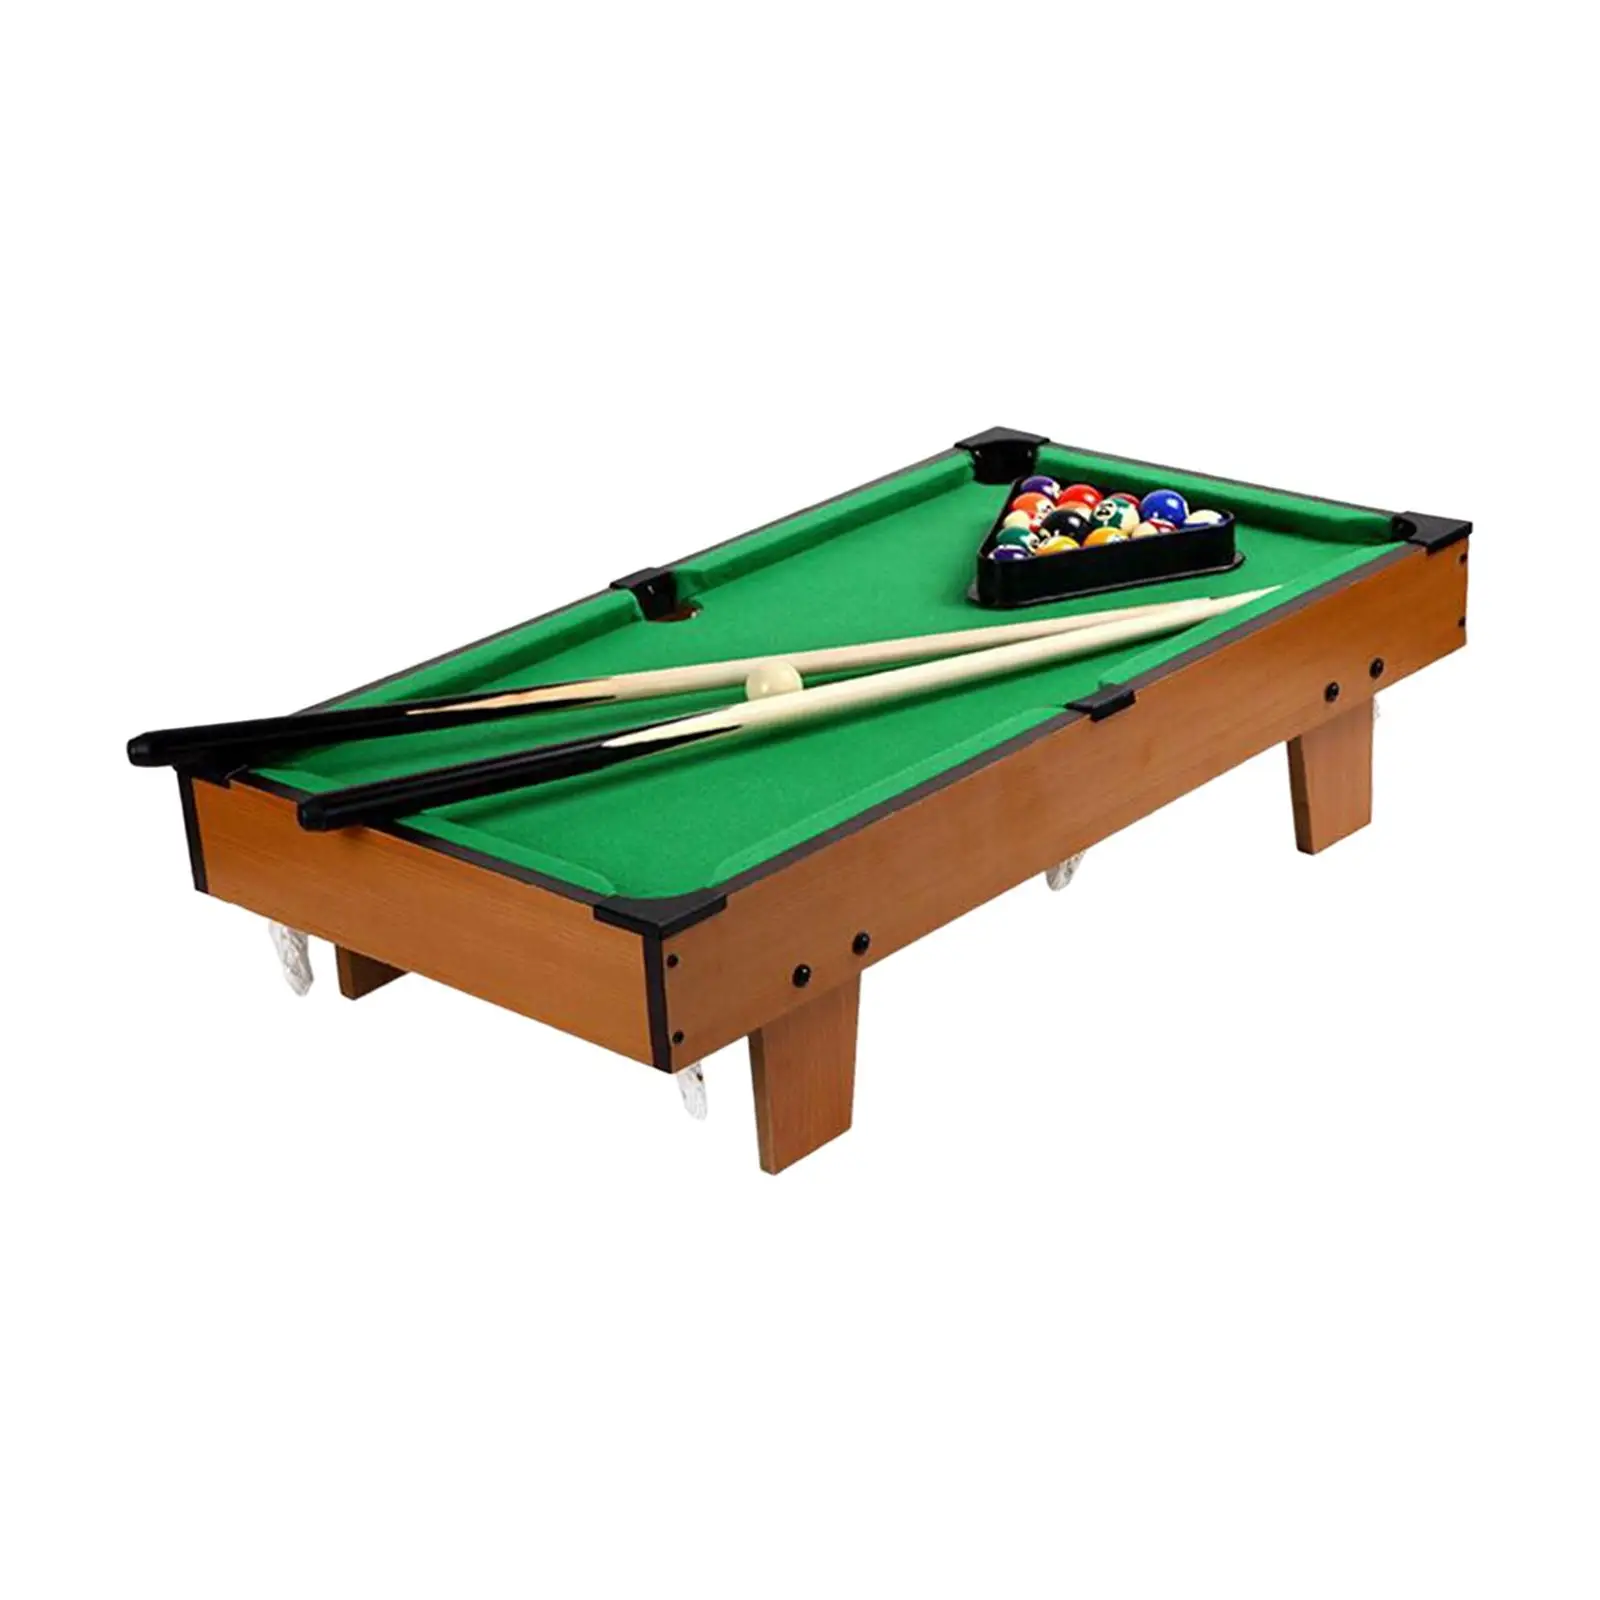 Portable Pool Table Set Chalk, Racking Triangle Indoor Game Toy Wood Mini Tabletop Billiards Desktop Snooker for Adults Kids